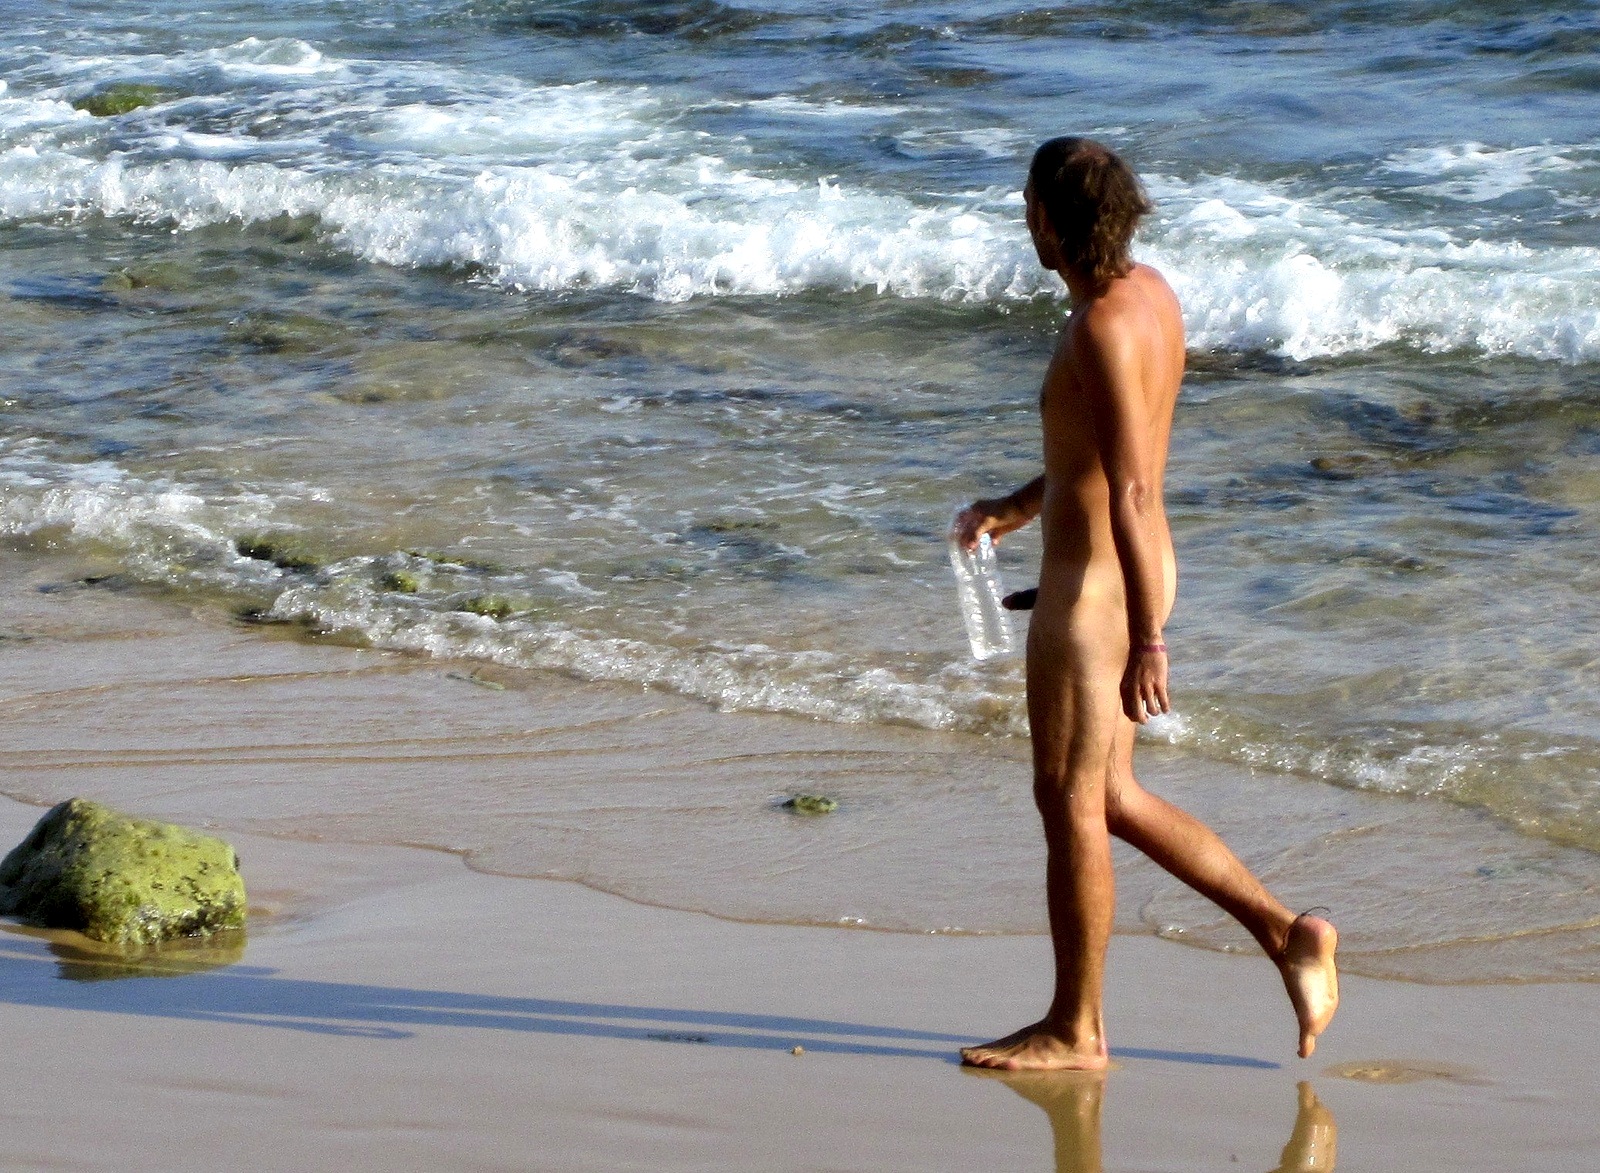 If you'd like to go naked, go to Spain's beaches.